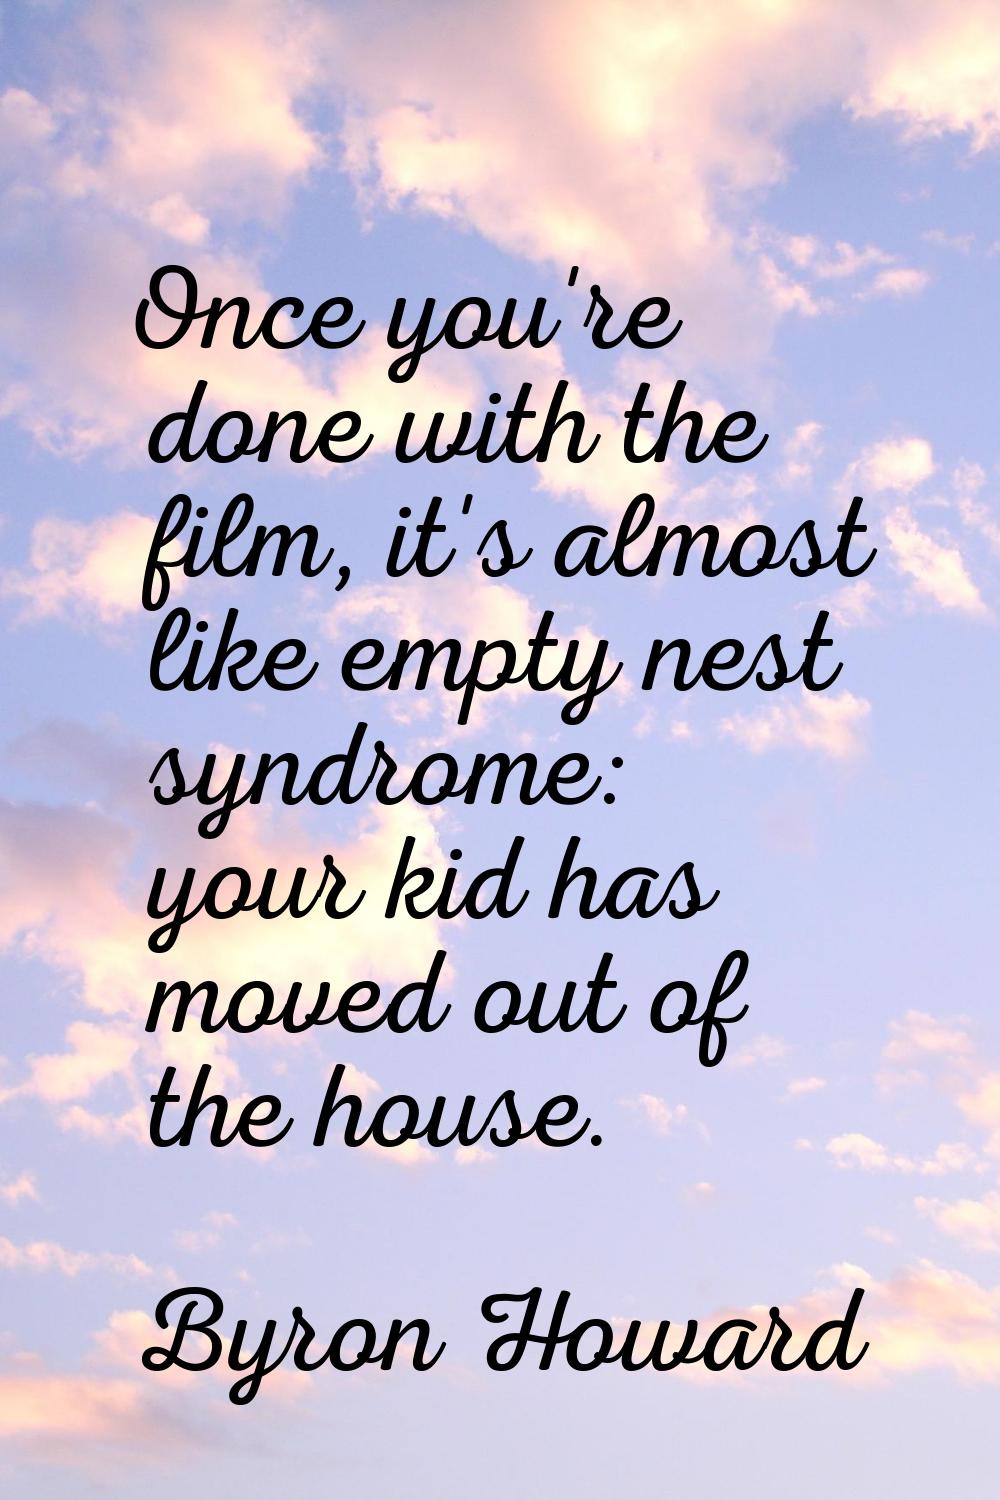 Once you're done with the film, it's almost like empty nest syndrome: your kid has moved out of the